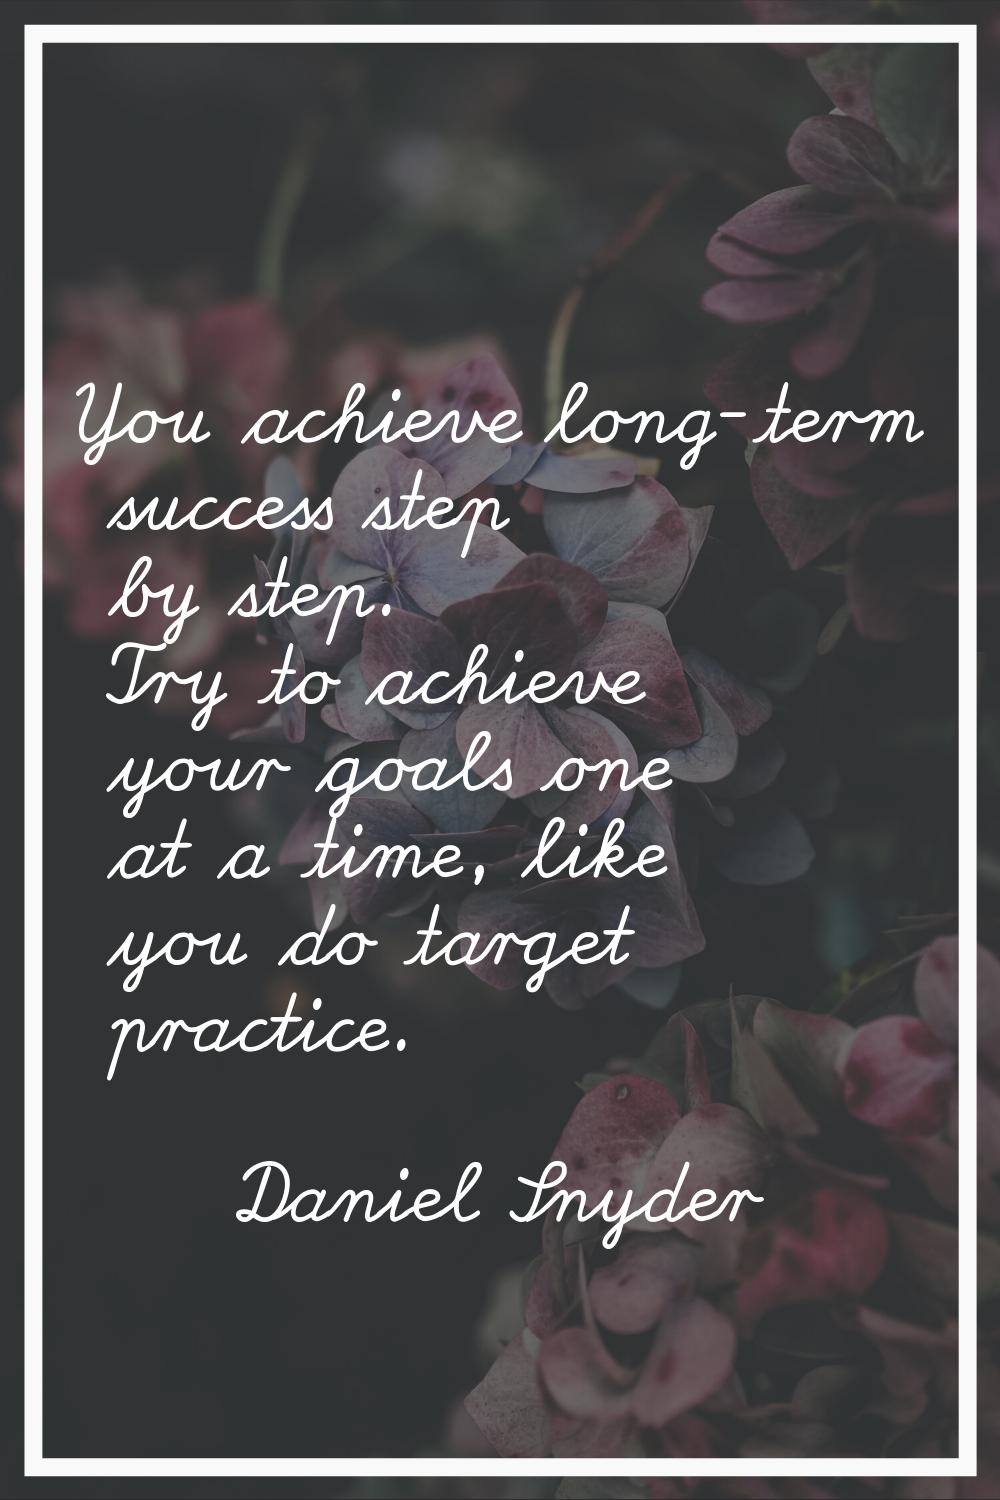 You achieve long-term success step by step. Try to achieve your goals one at a time, like you do ta